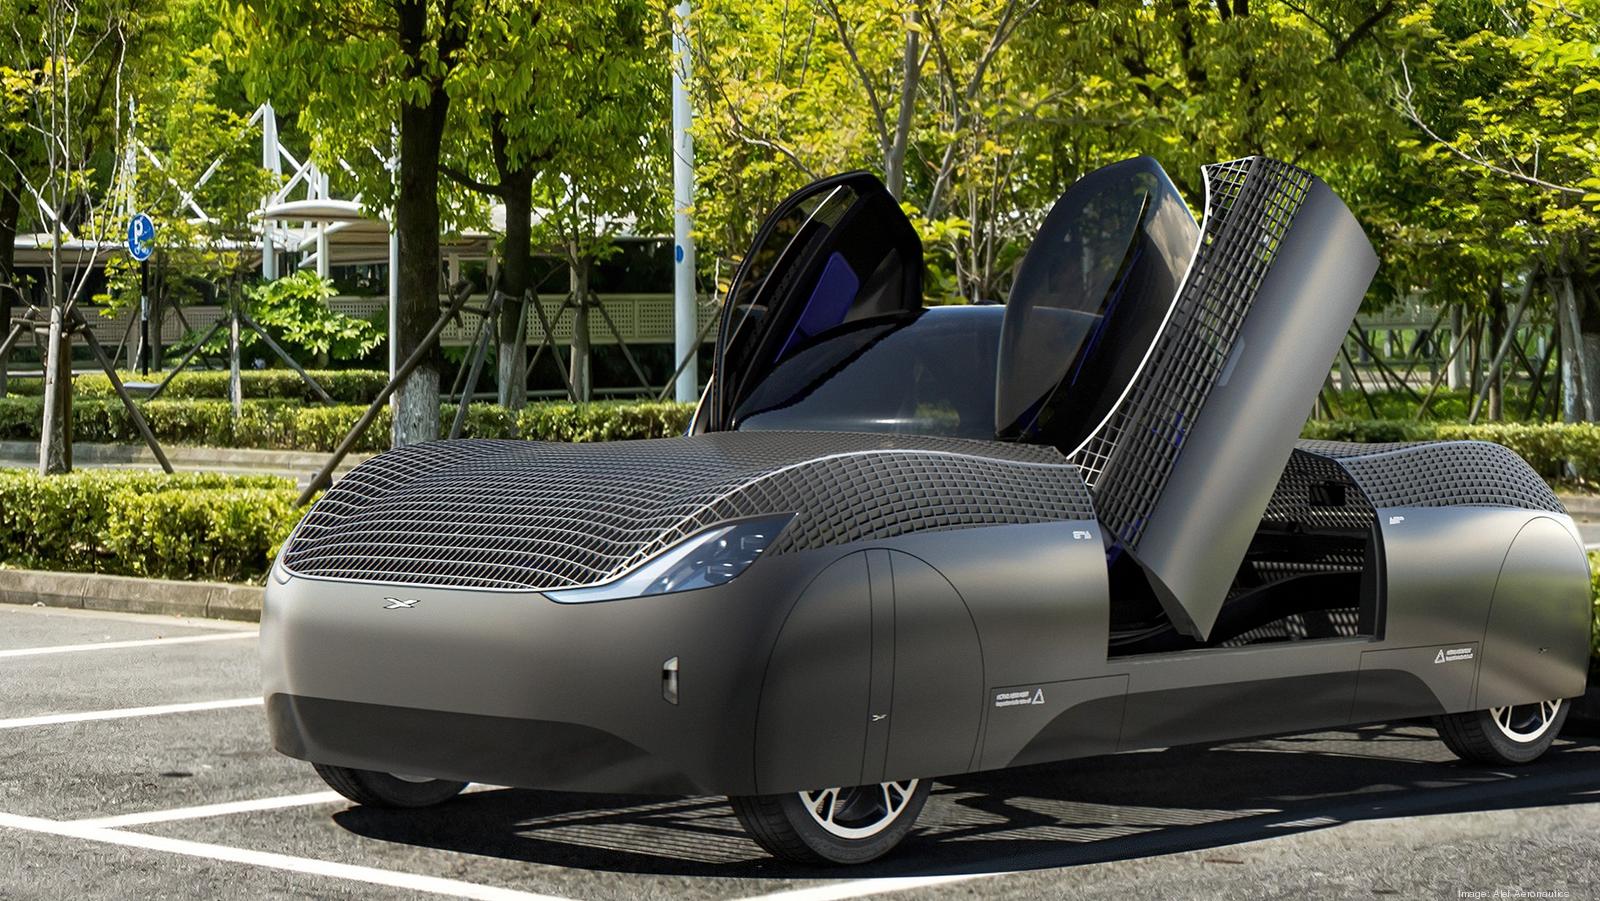 Bay Area Inno - Santa Clara startup Alef's unveiled a flying car that actually looks like it could do both